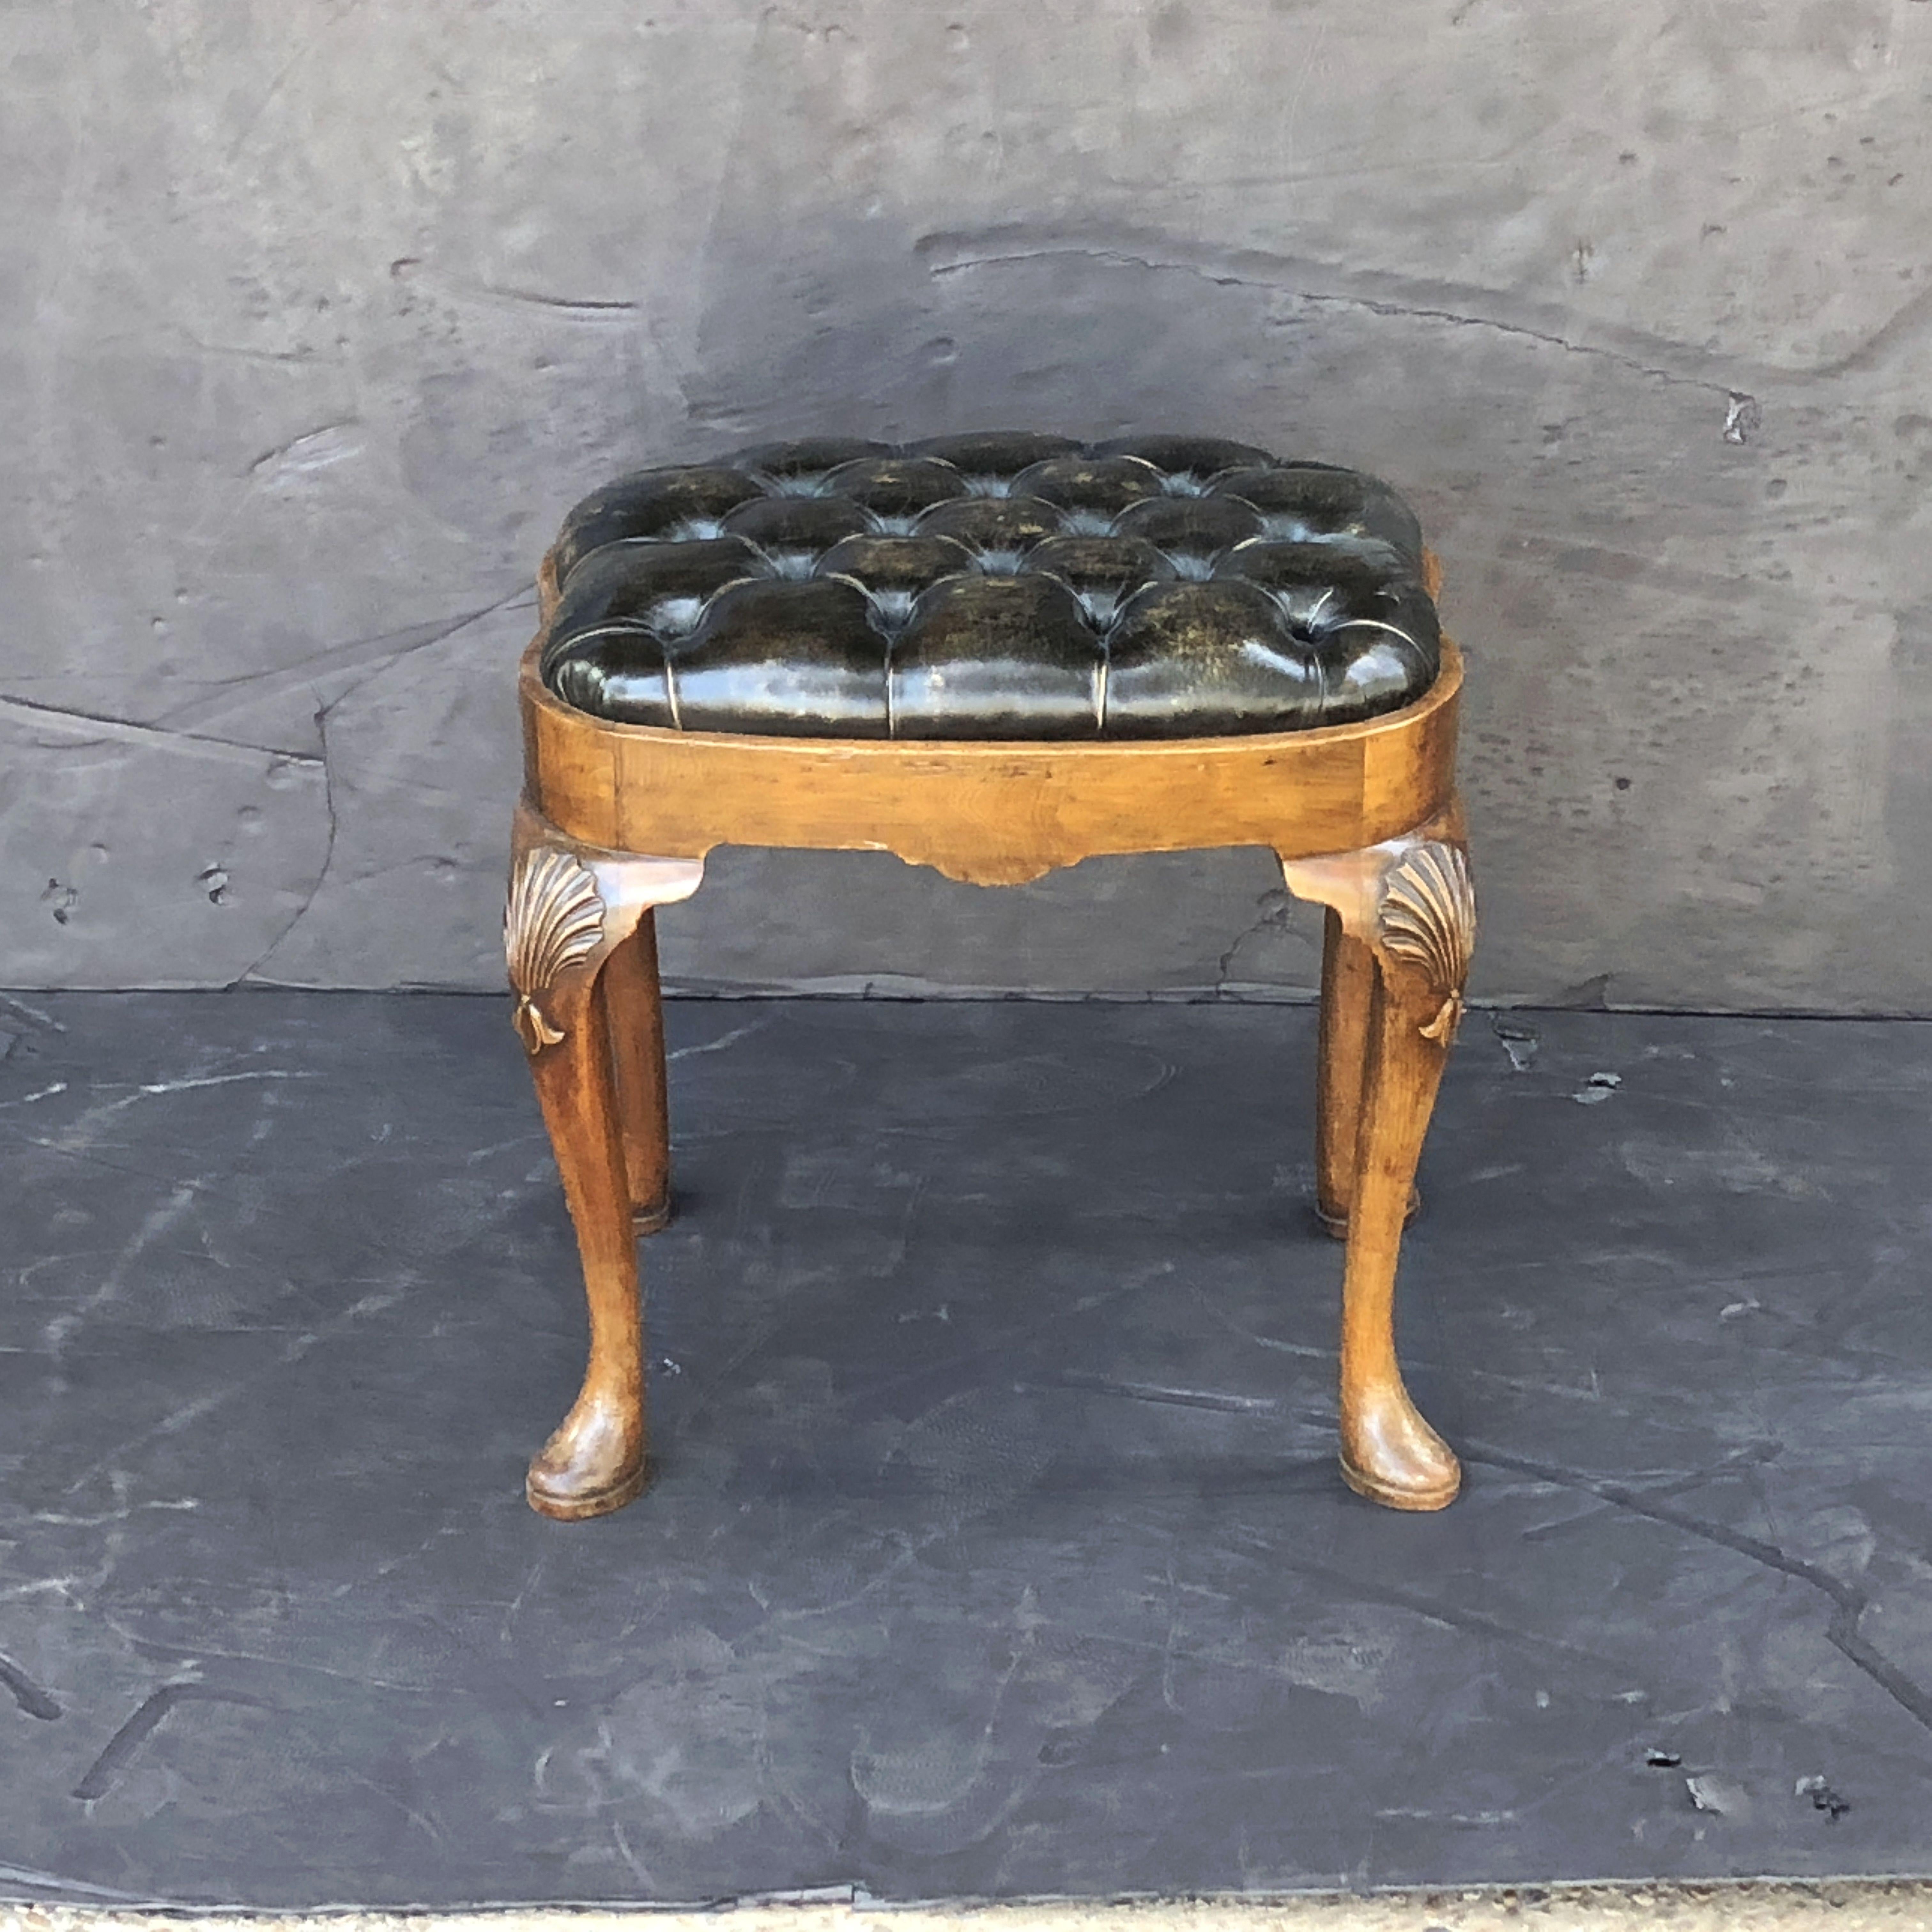 Carved English Ottoman Stool of Tufted Leather on Walnut Cabriole Legs